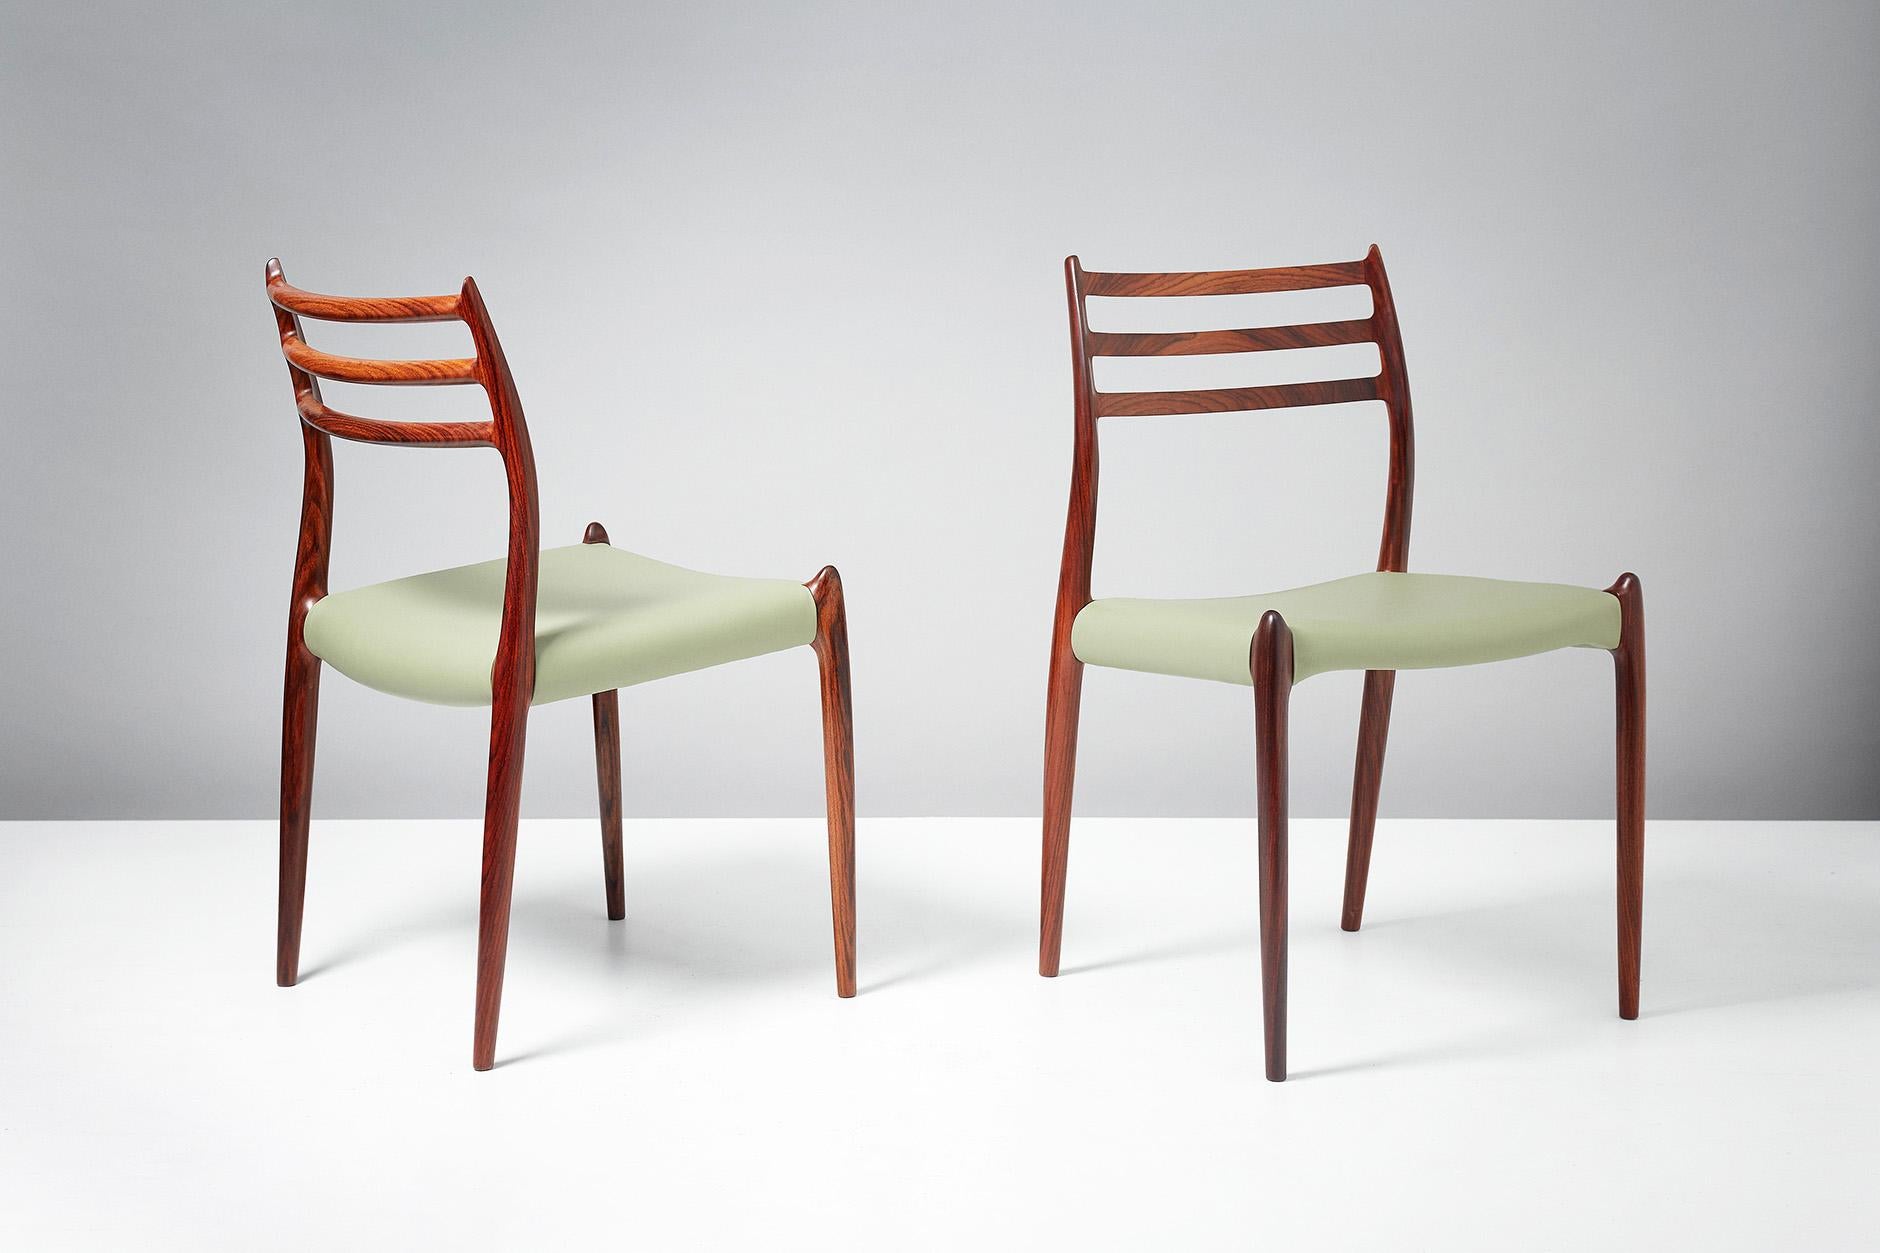 Danish Niels O. Møller Model 78 Rosewood Dining Chairs, 1962 For Sale